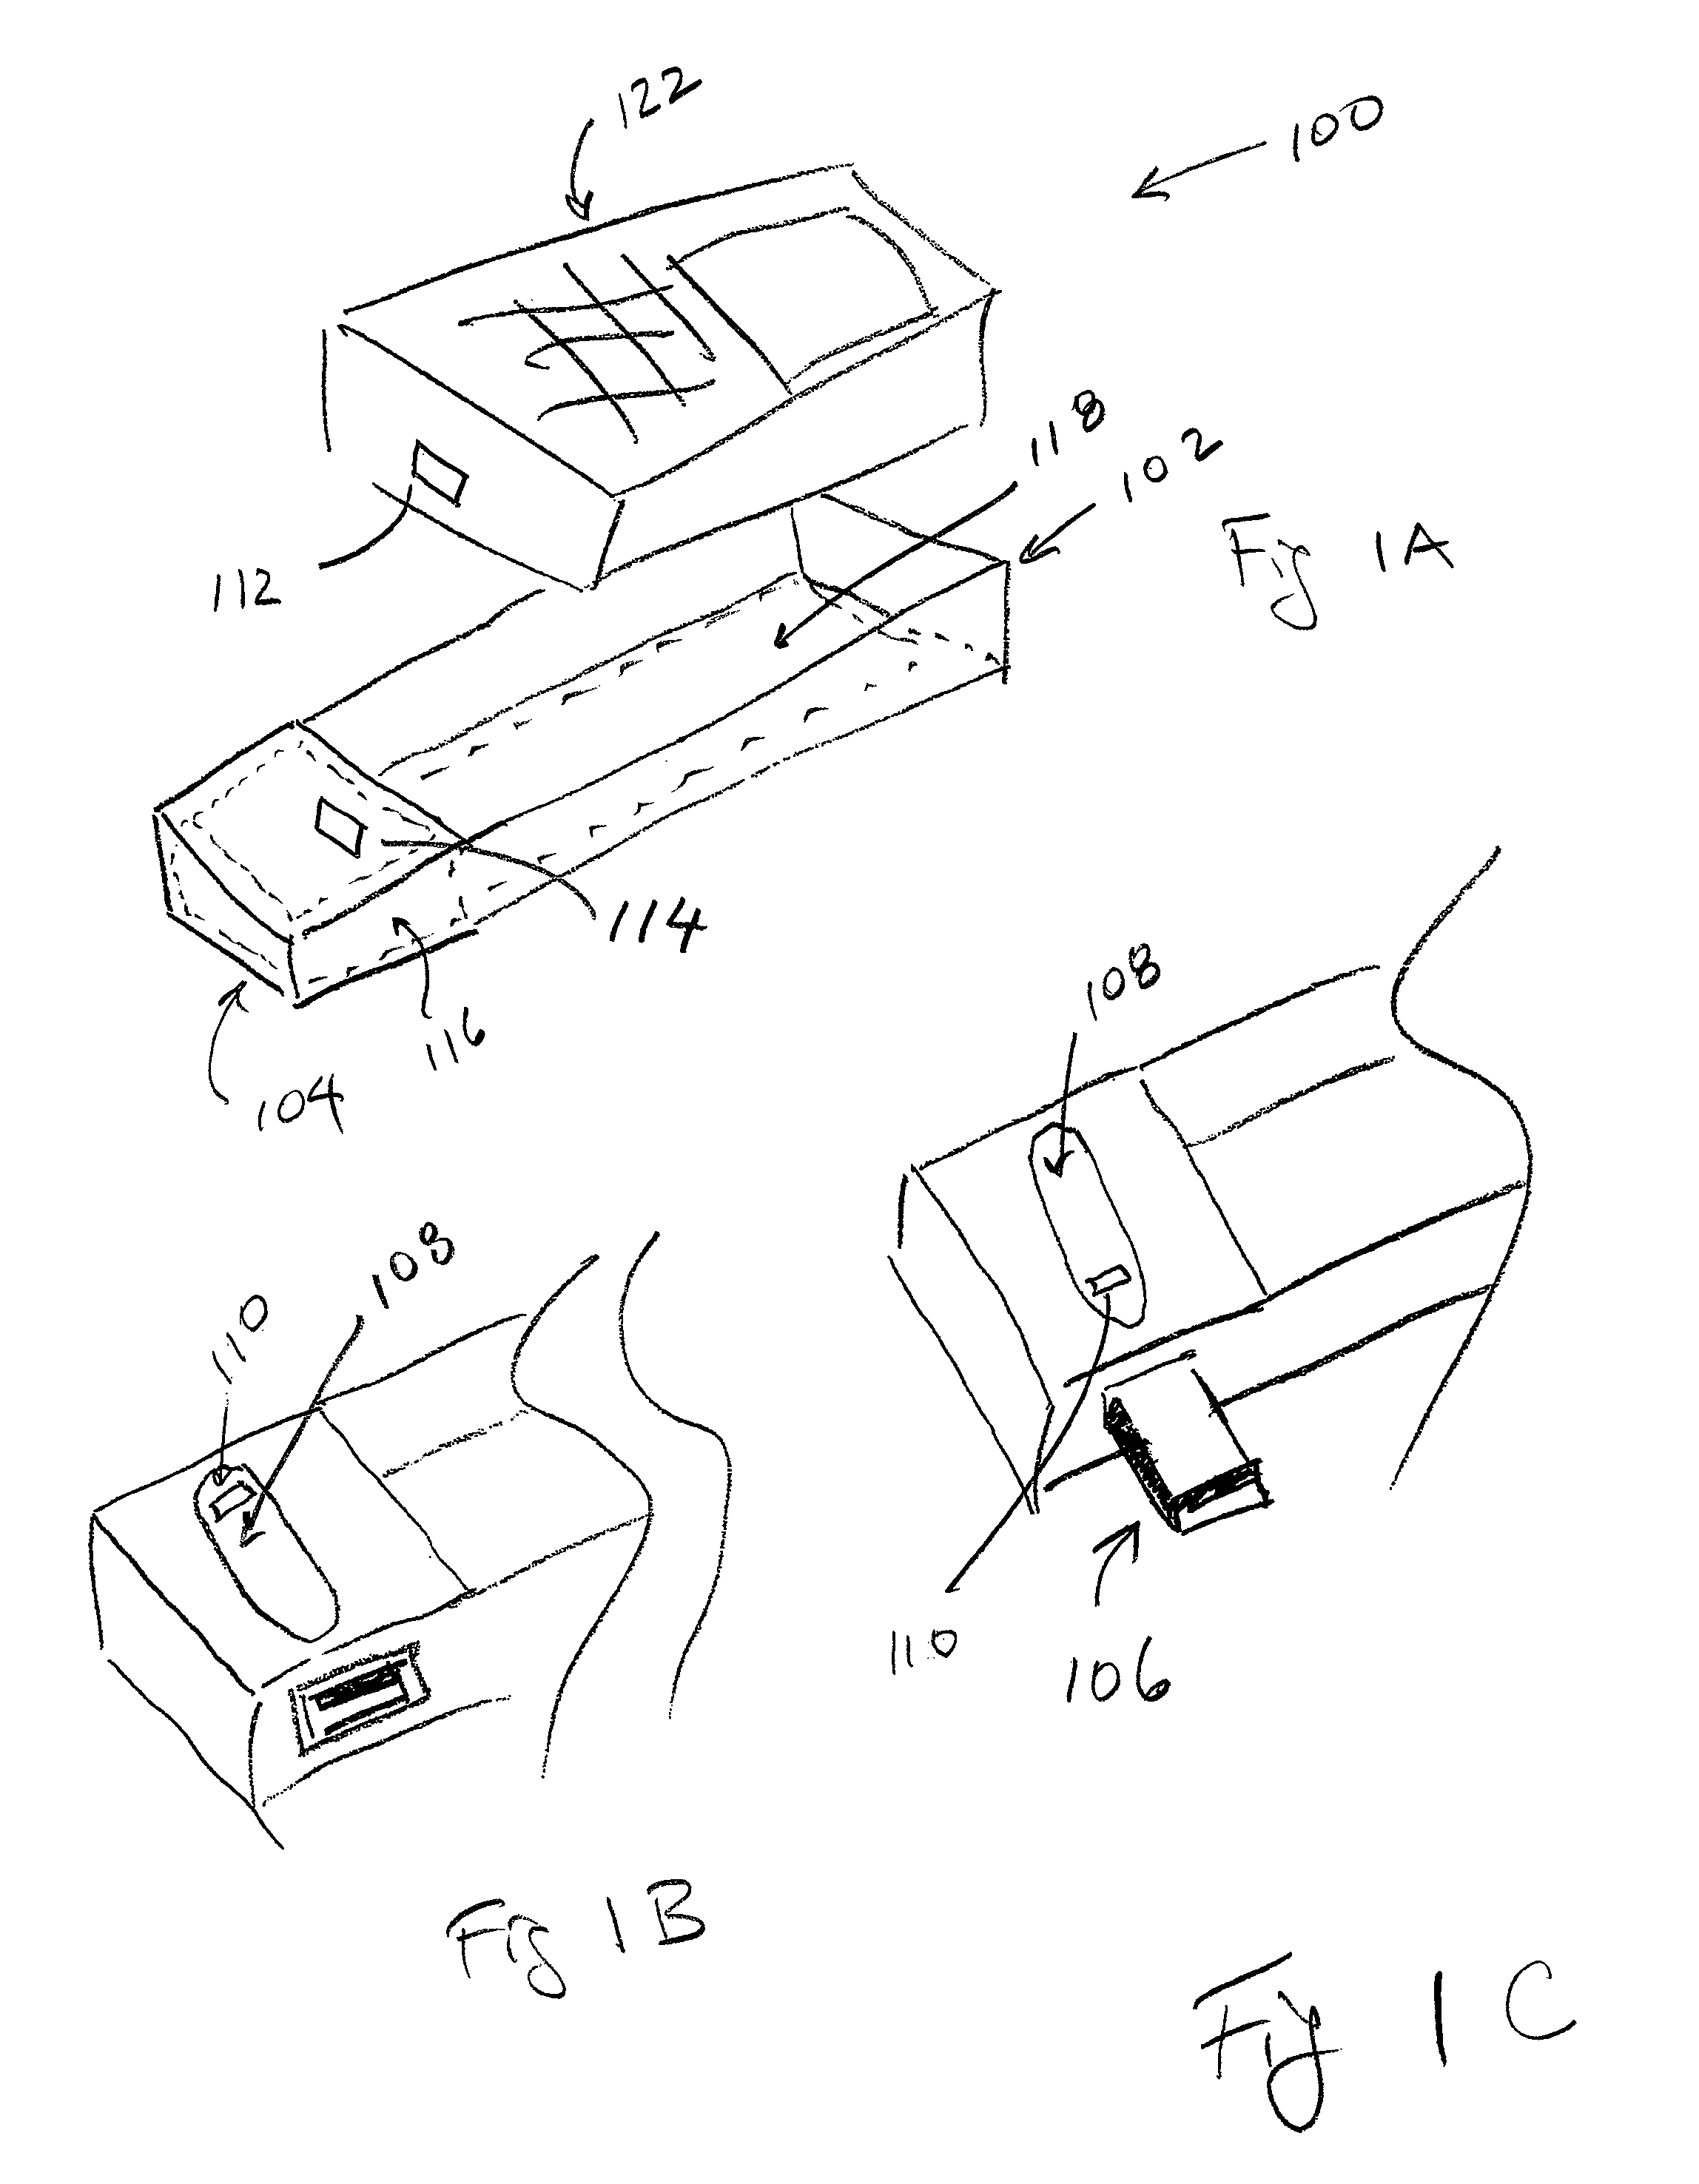 Electronic device shield and connector case